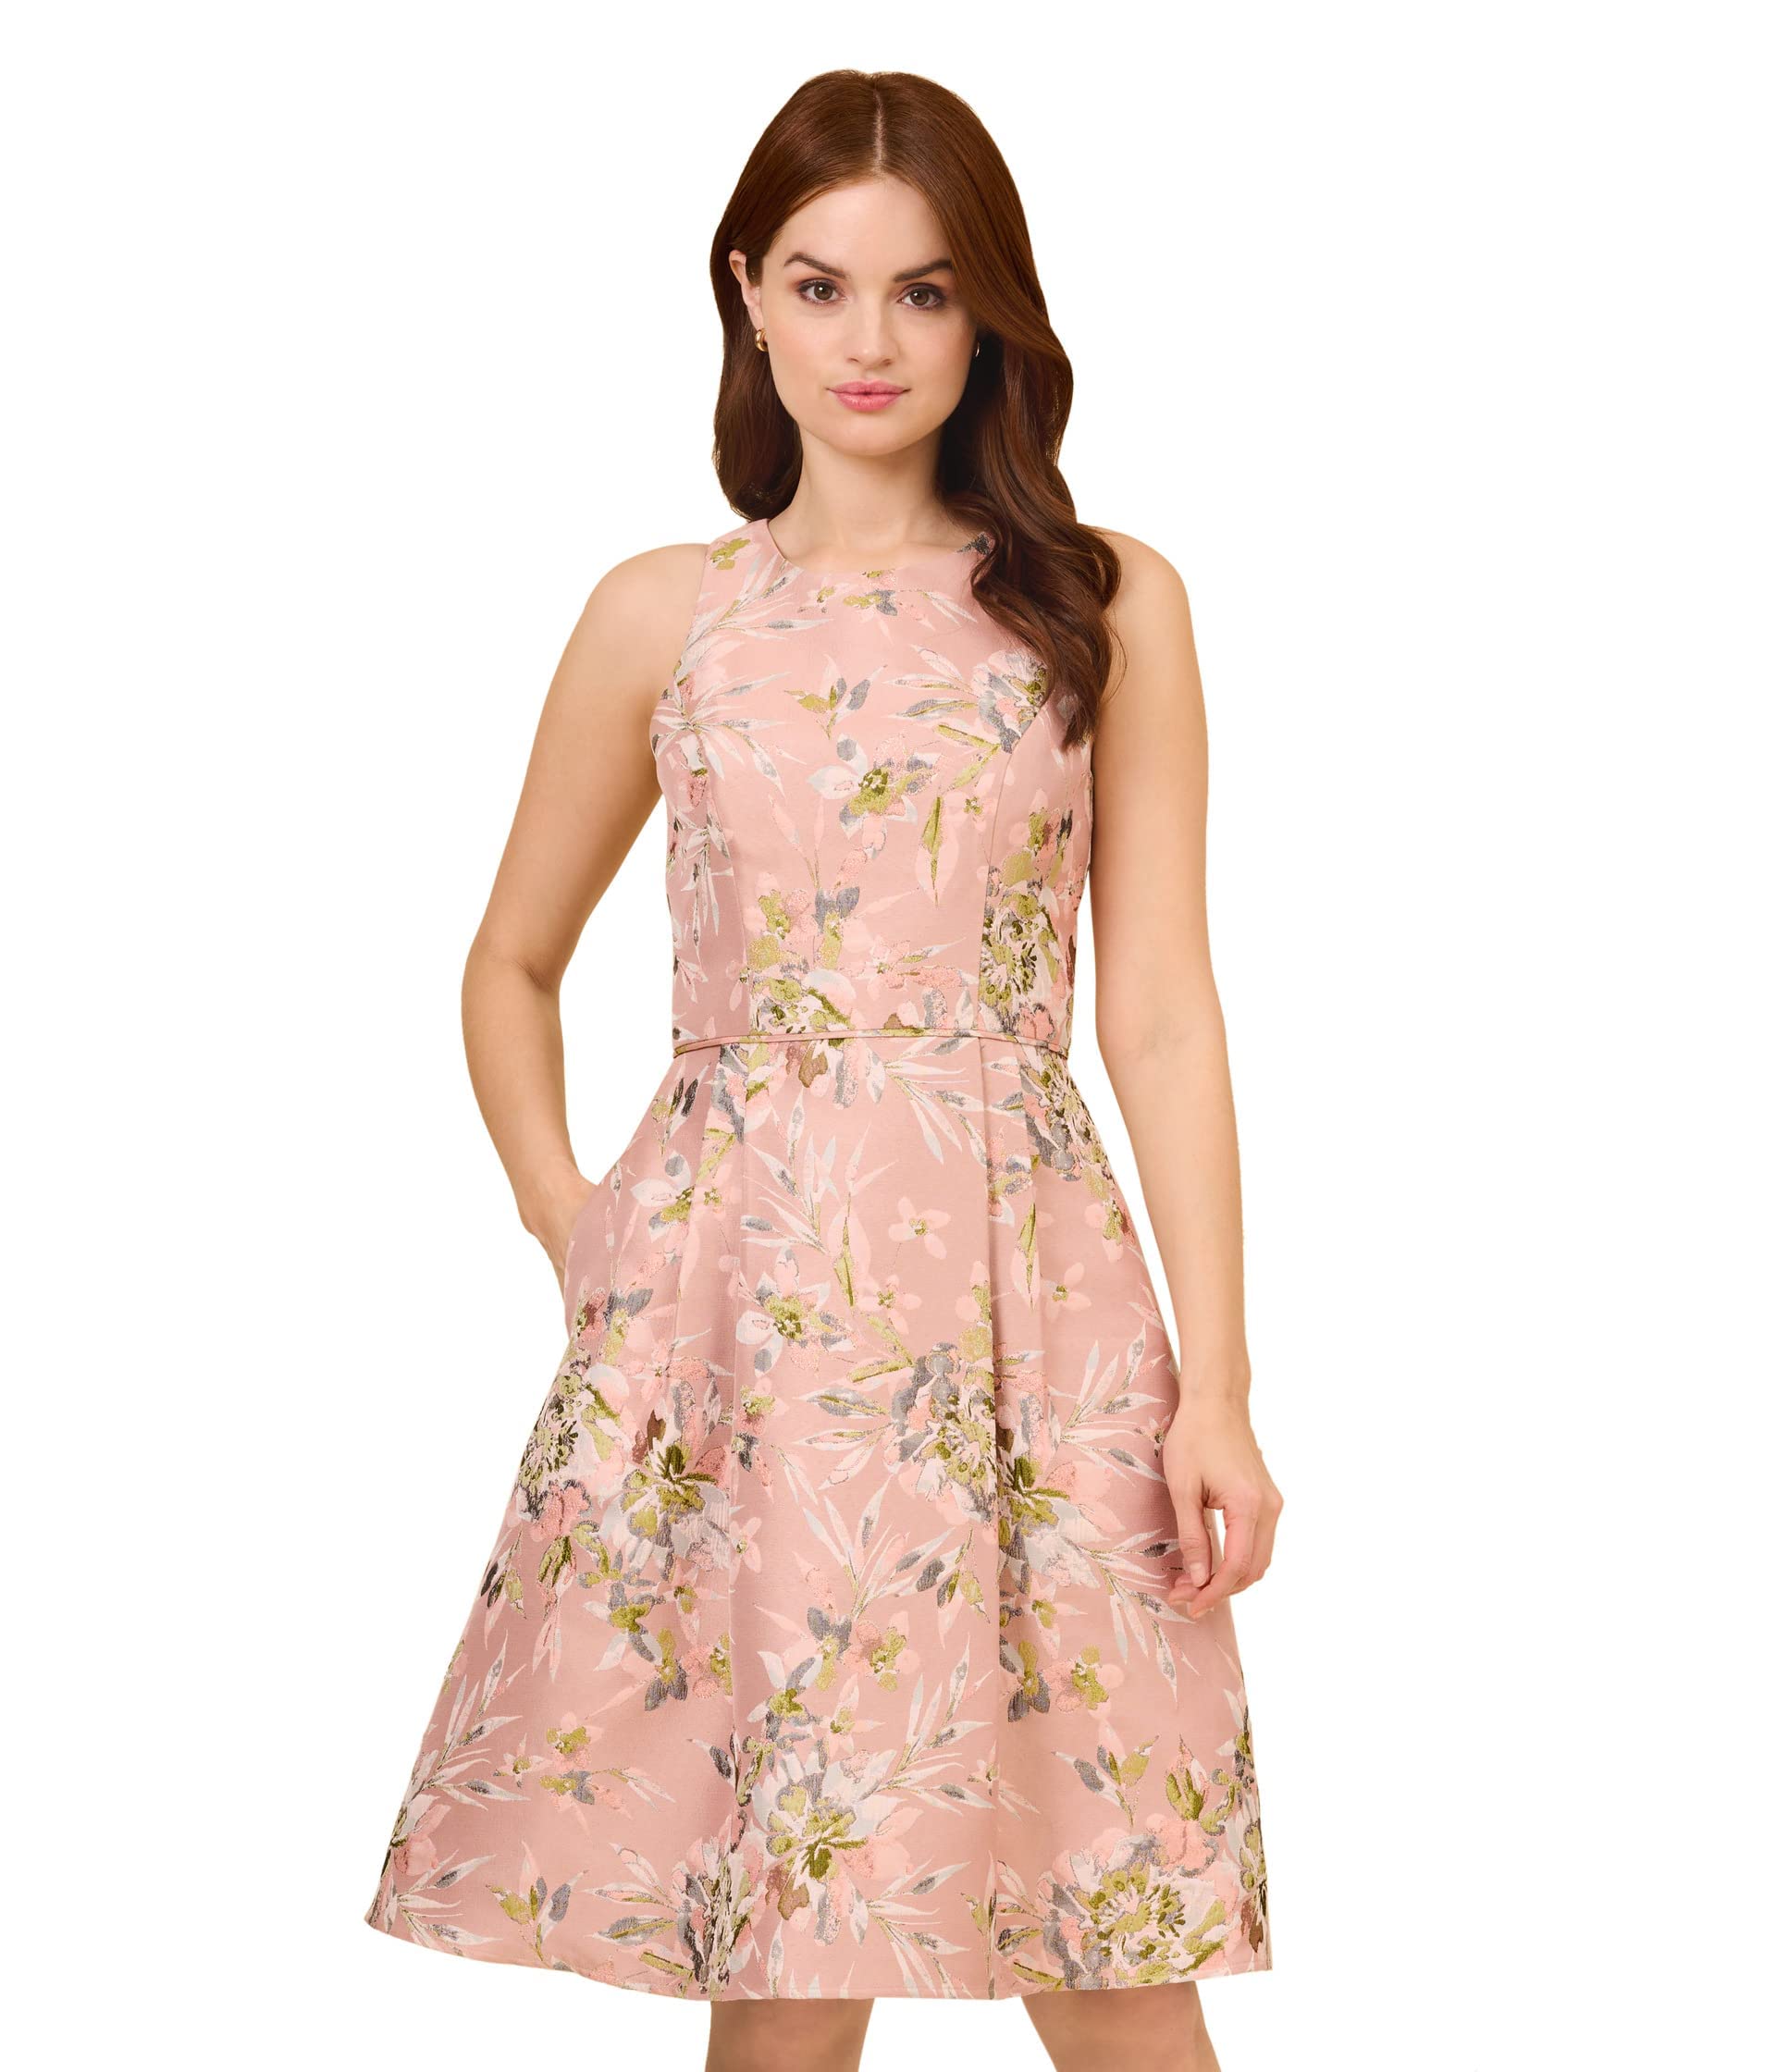 Adrianna Papell Women's Floral Jacquard Dress